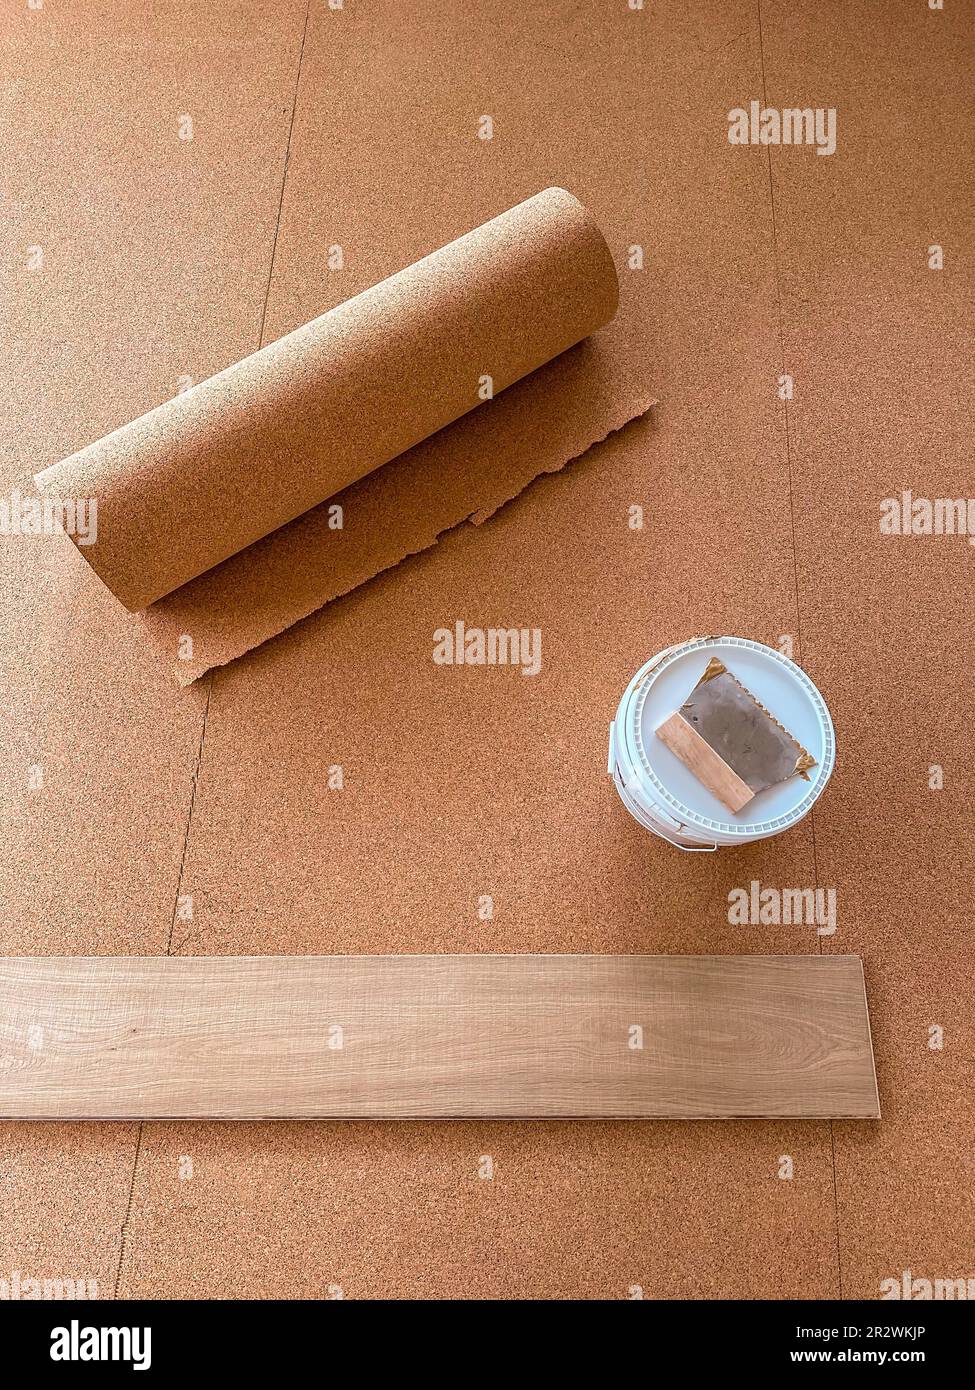 Cork is laid on the floor to insulate against impact sound. Stock Photo